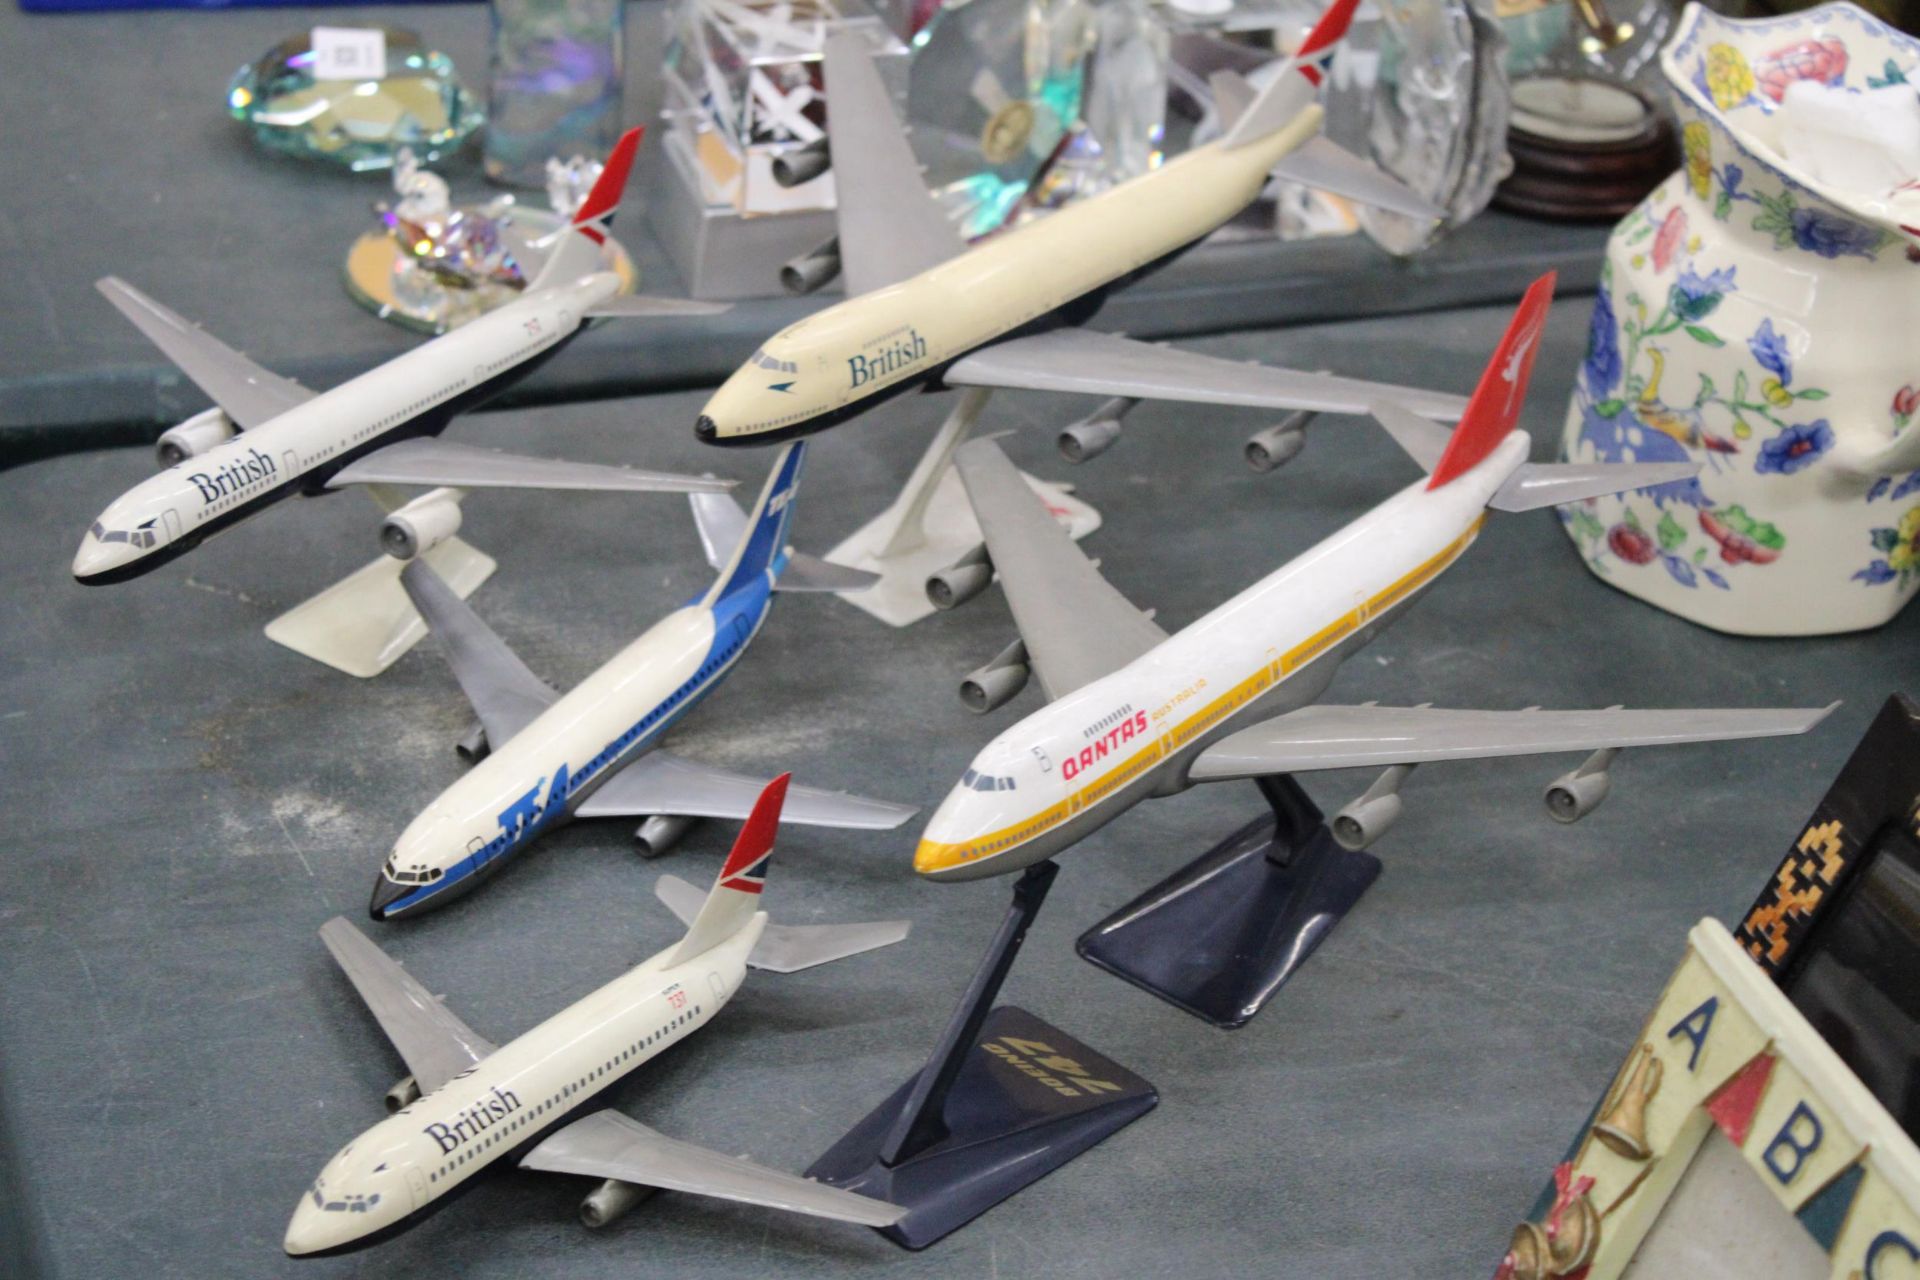 FIVE VINTAGE MODELS OF PLANES, FOUR ON PLINTHS, TO INCLUDE BRITISH AIRWAYS AND QANTAS - Image 6 of 6